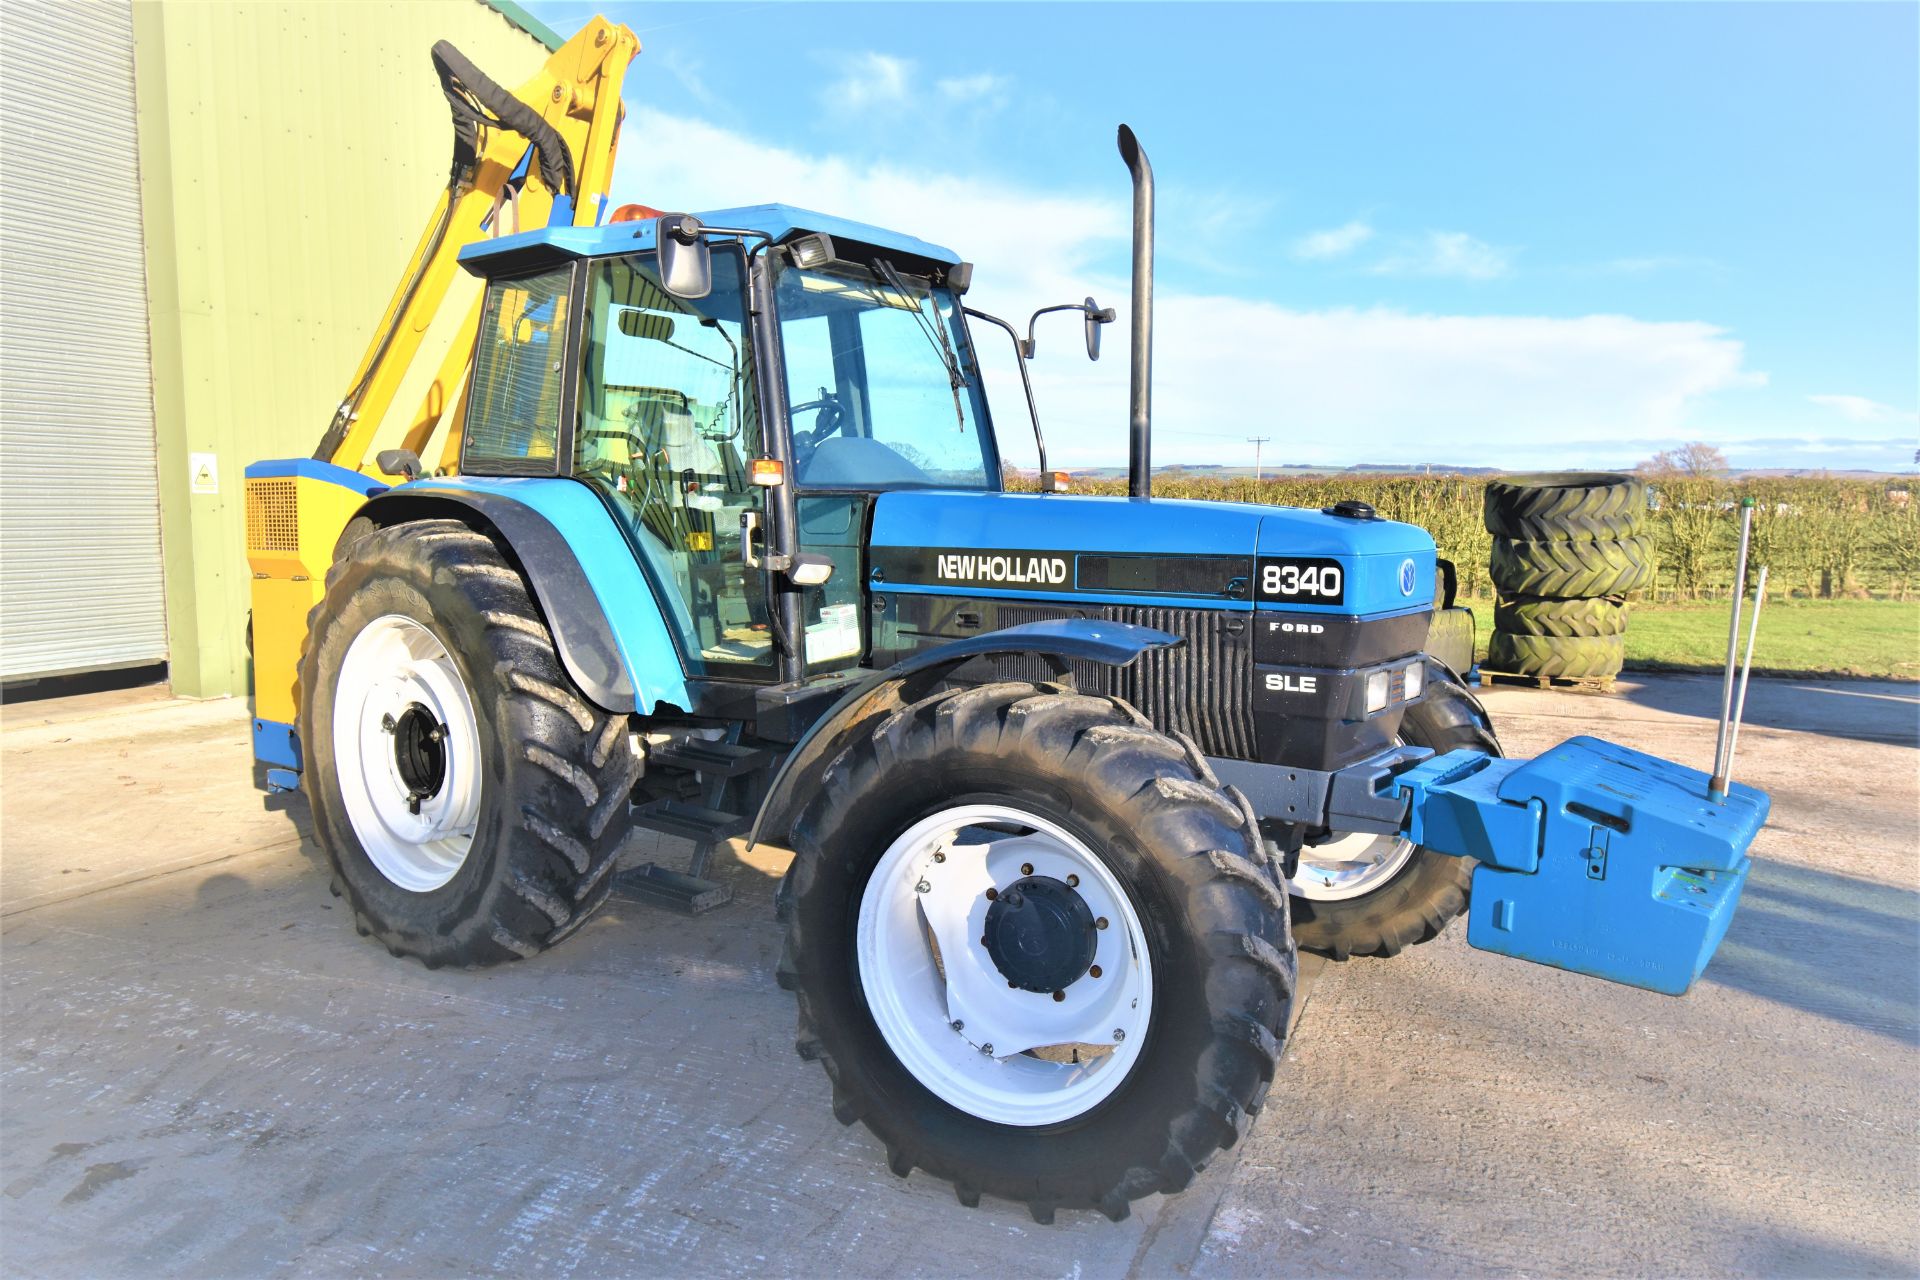 New-Holland / Ford 8340 sle - Image 3 of 12